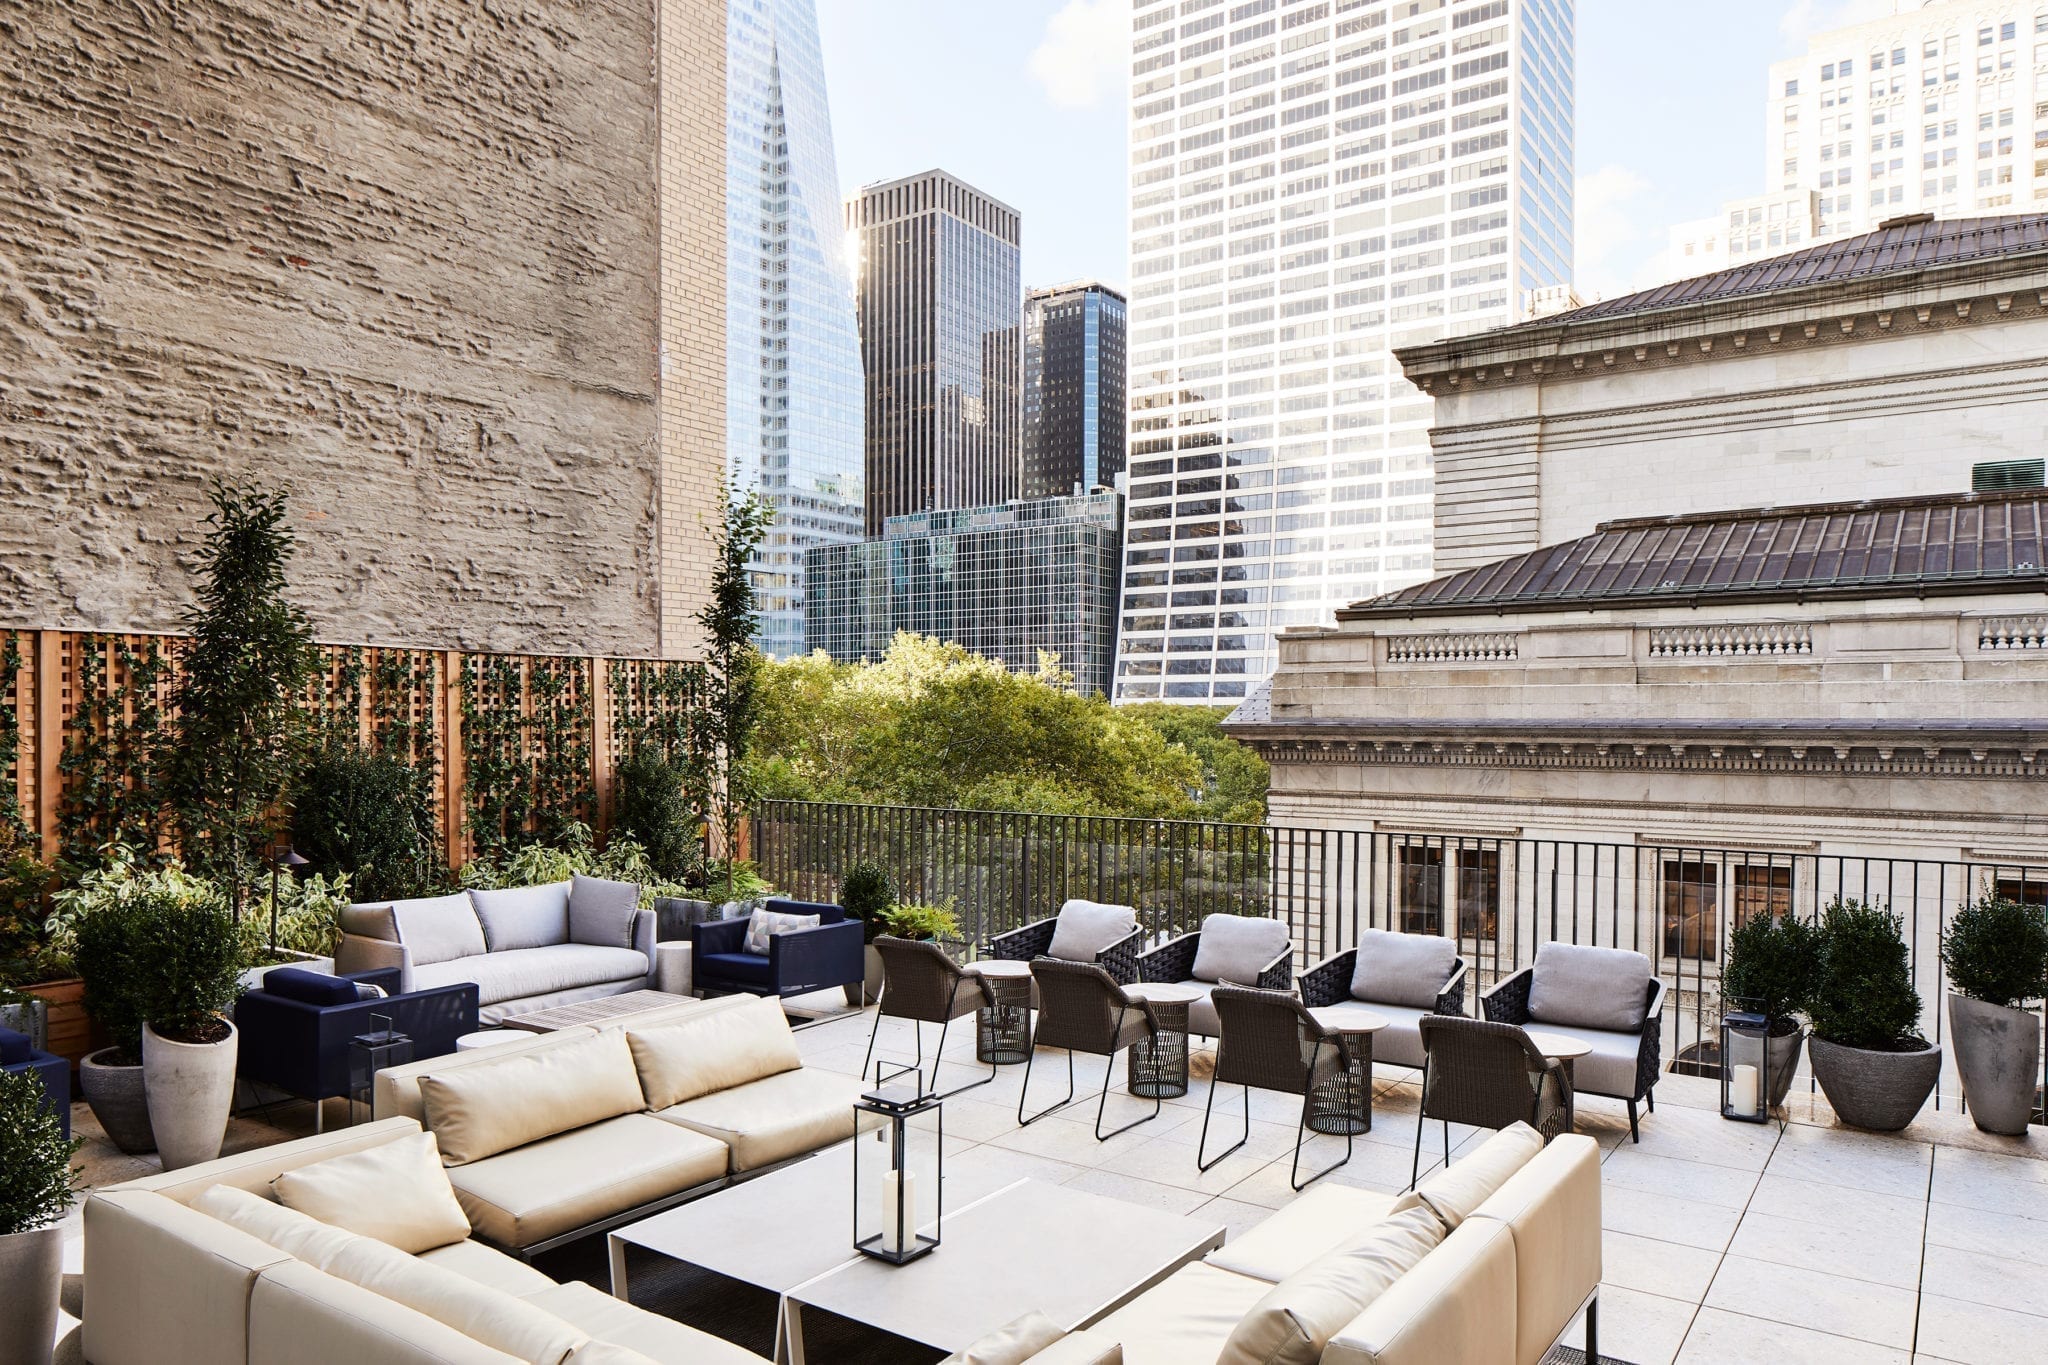 The 15 Best Hotels With a View in NYC